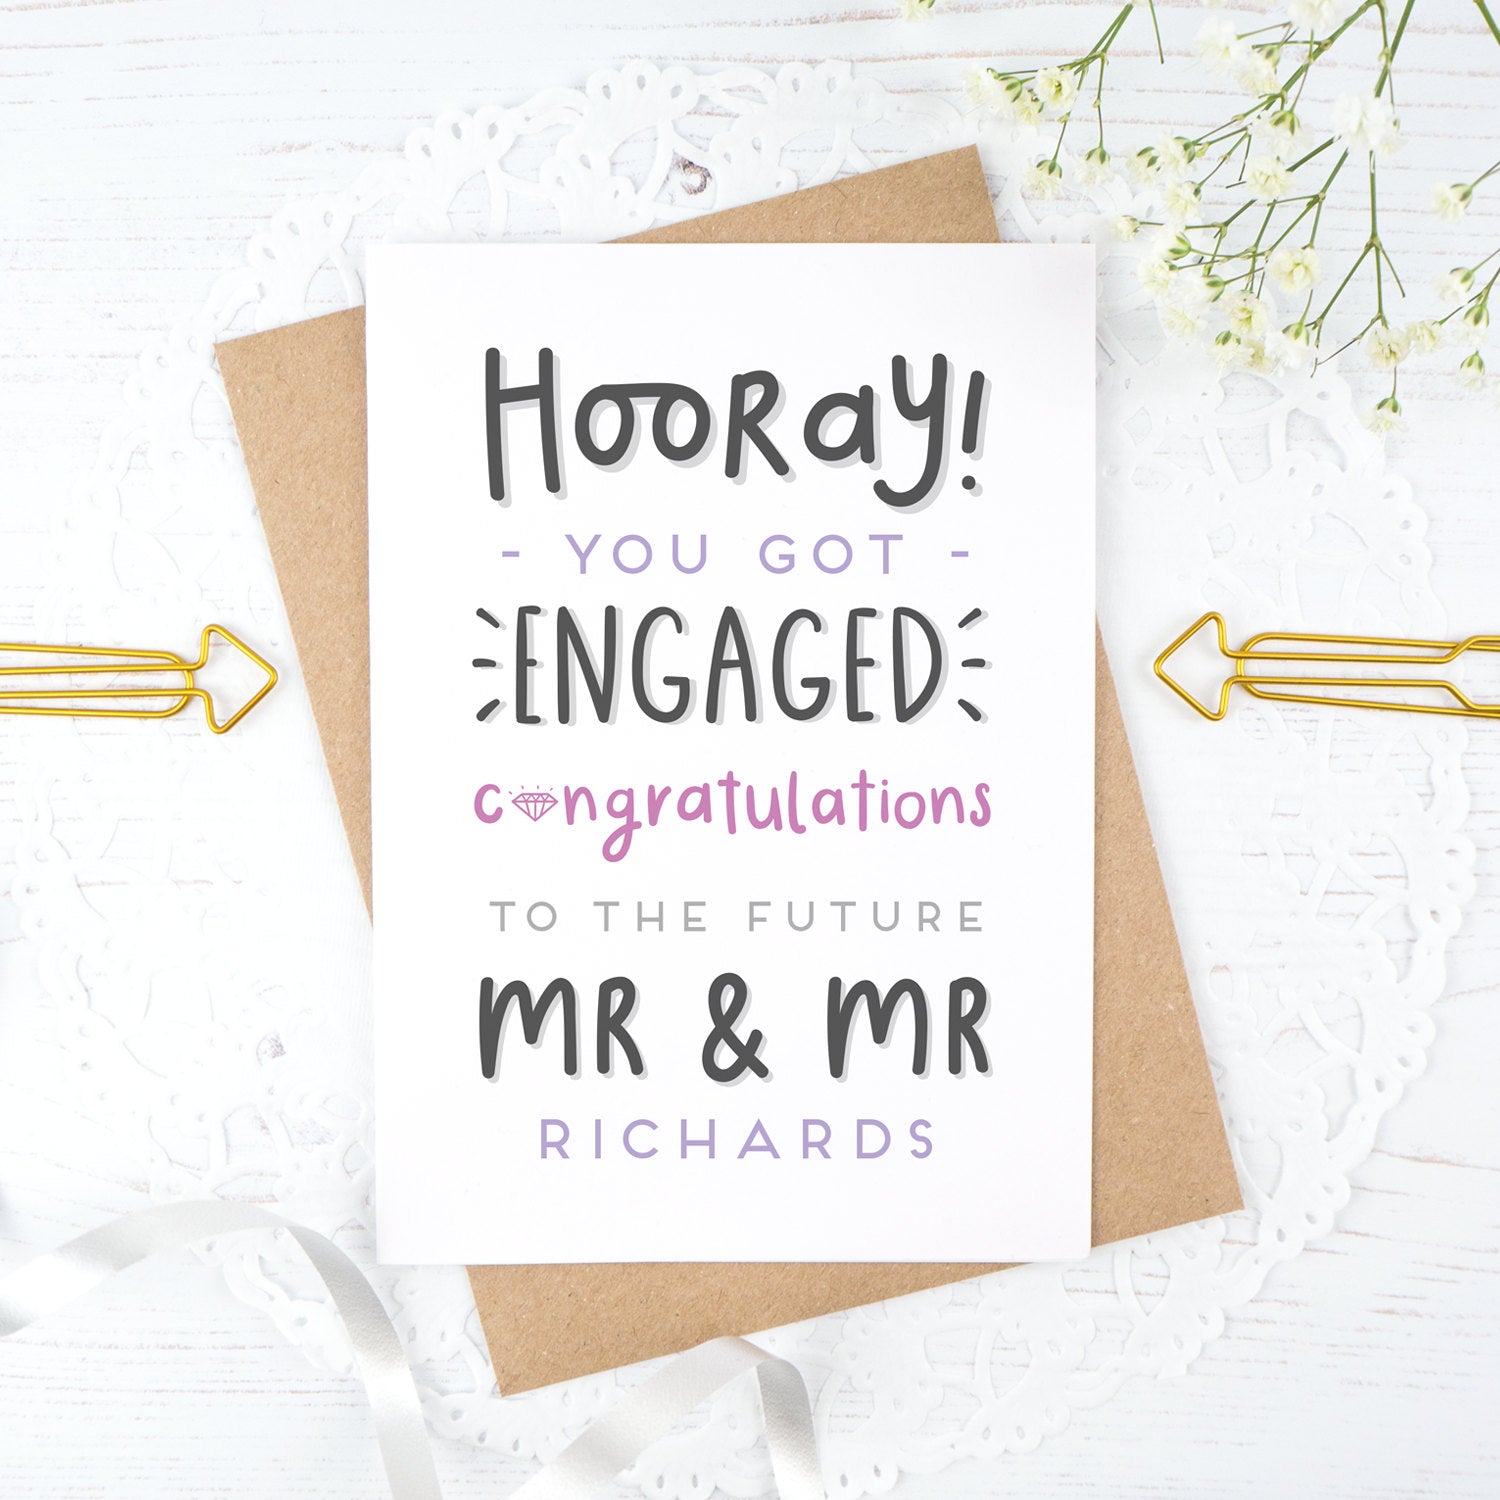 Hooray you got engaged! - Personalised Mr & Mr engagement card in purple